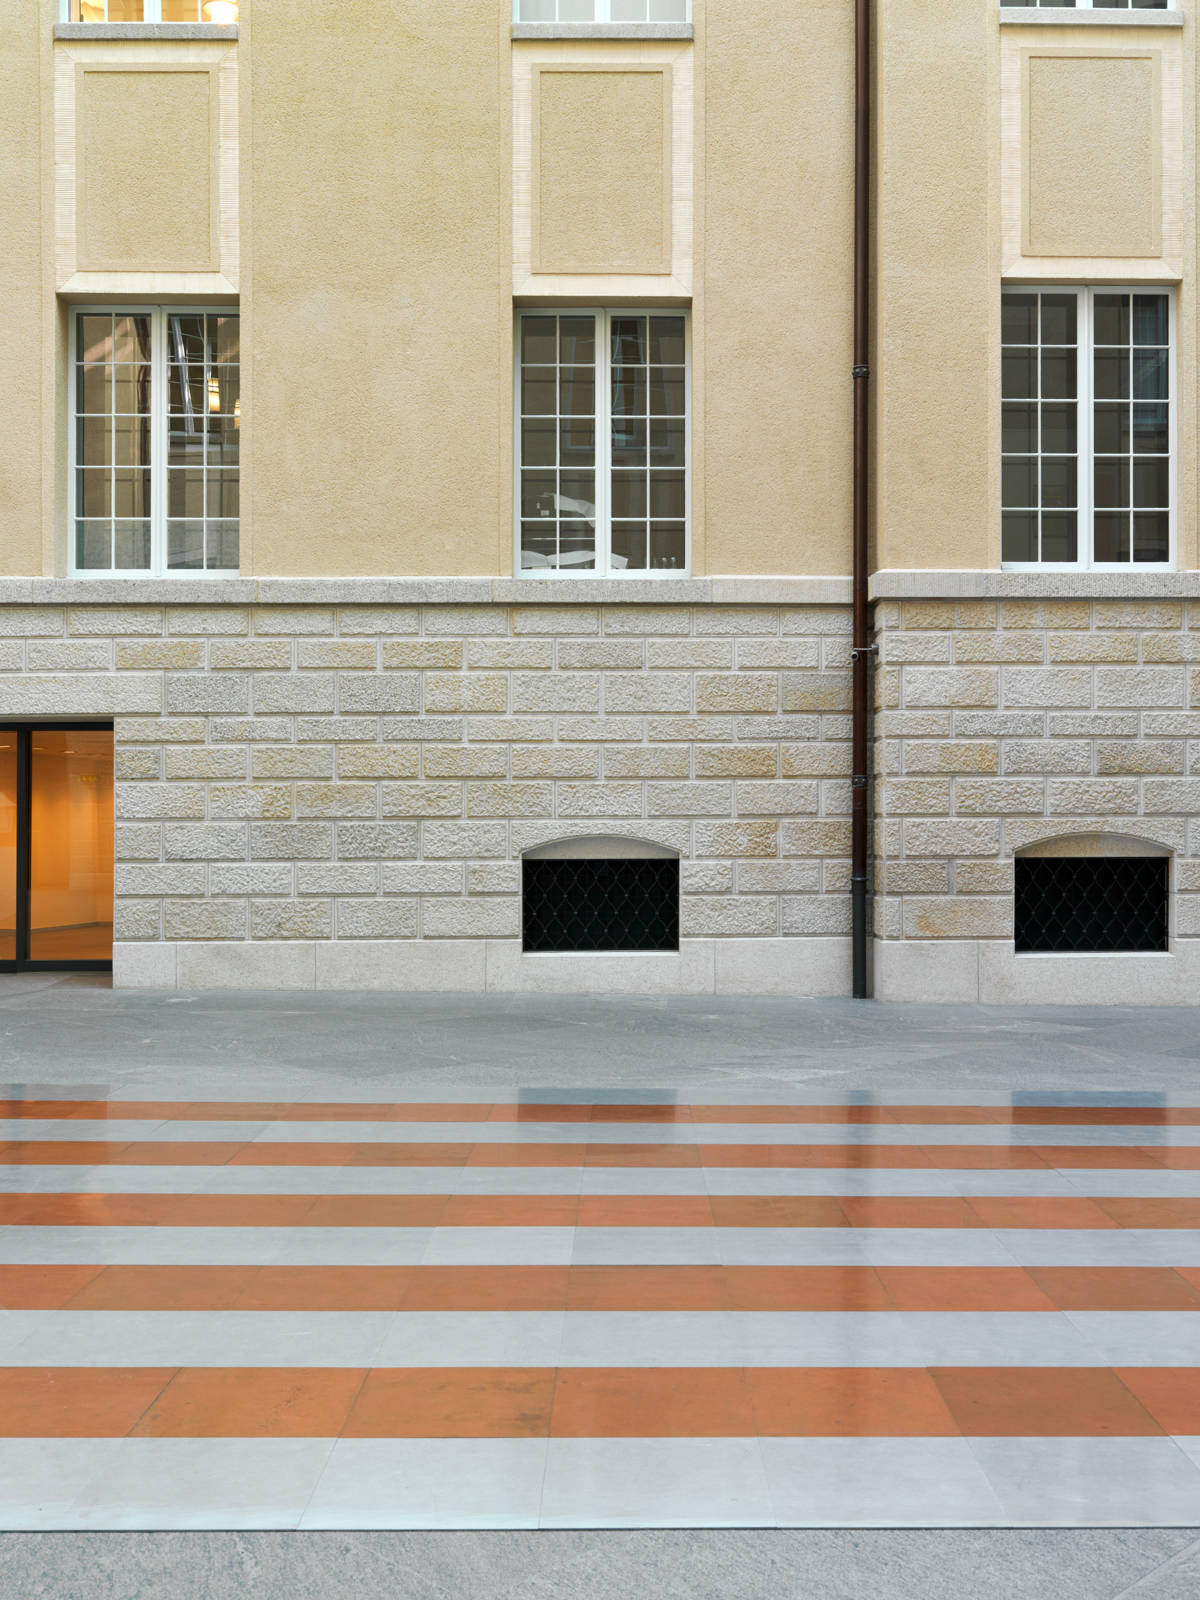 Carl Andre / Art at Swiss Re, installation view, Zurich / 2014